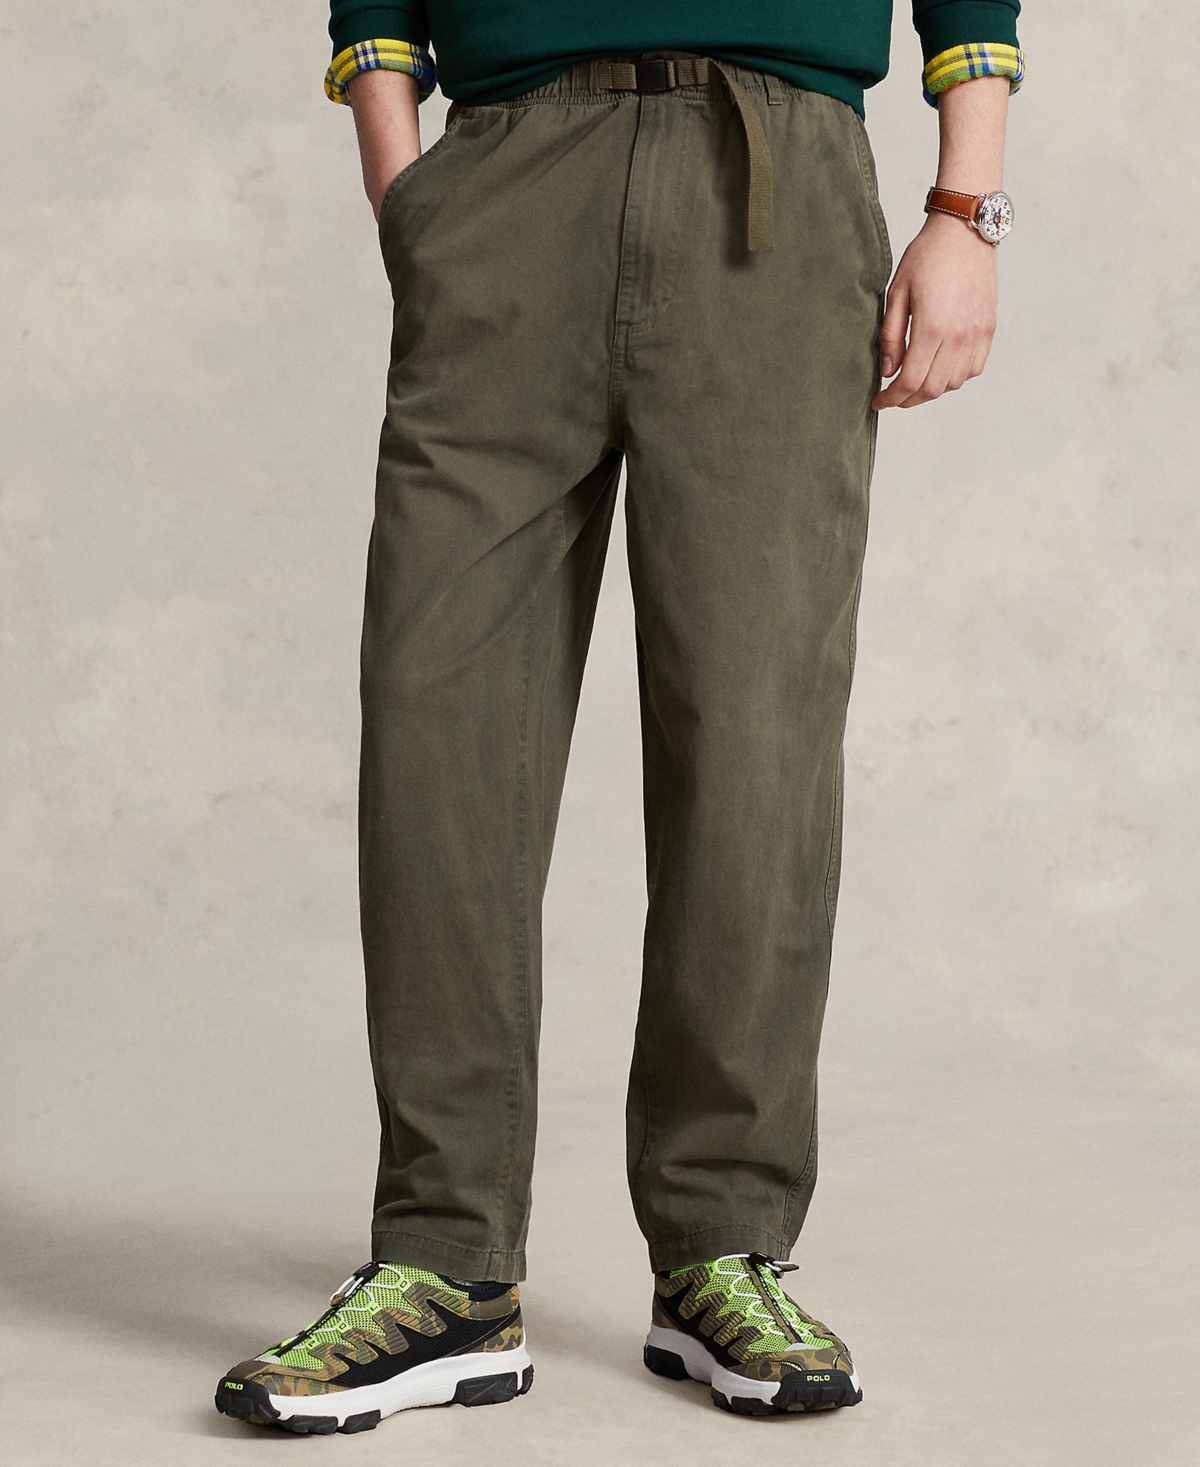 Polo Ralph Lauren Men's Cotton Relaxed-fit Twill Hiking Pants In Dark Loden W,basic Olive